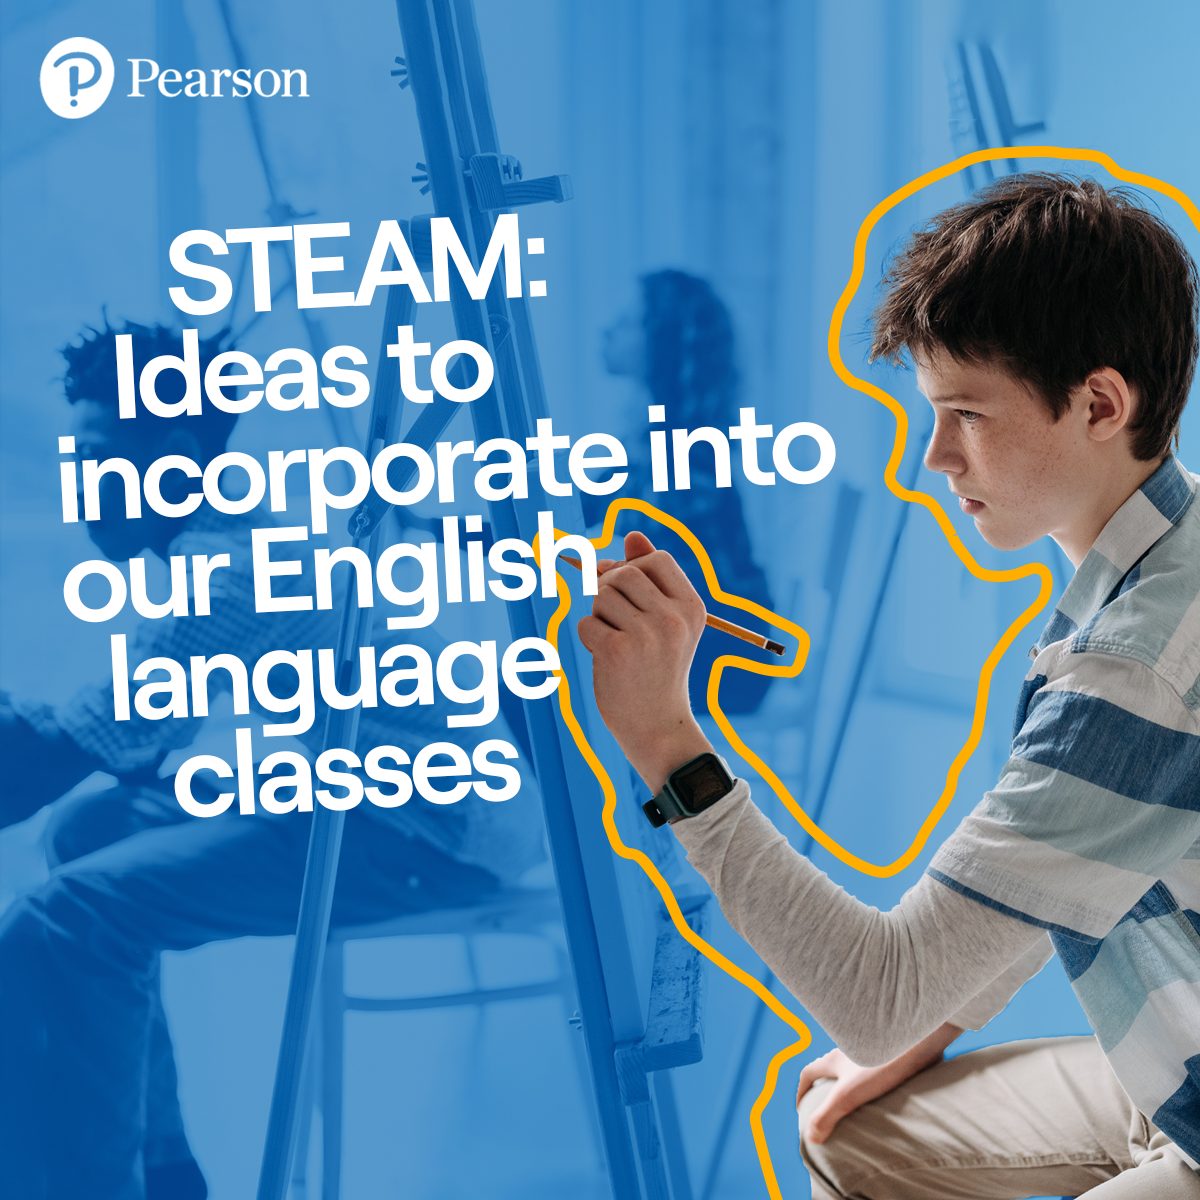 STEAM: Ideas to incorporate into our English language classes